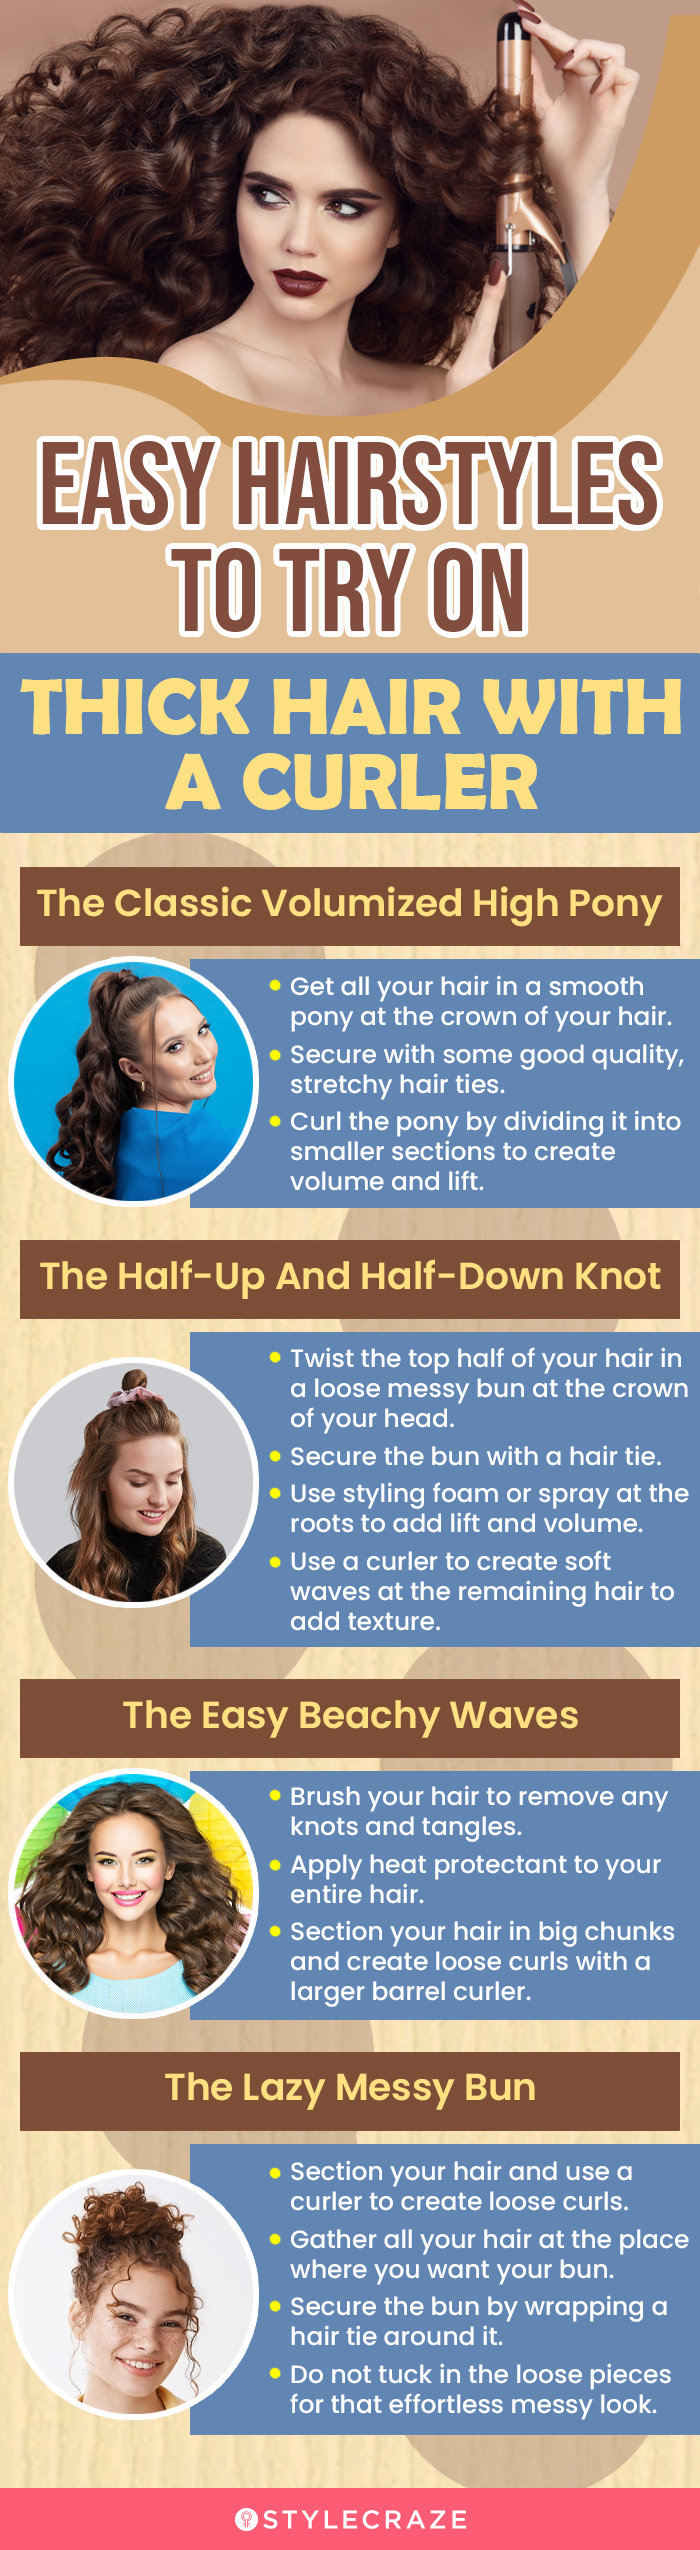 Easy Hairstyles To Try On Thick Hair With A Curler (infographic)